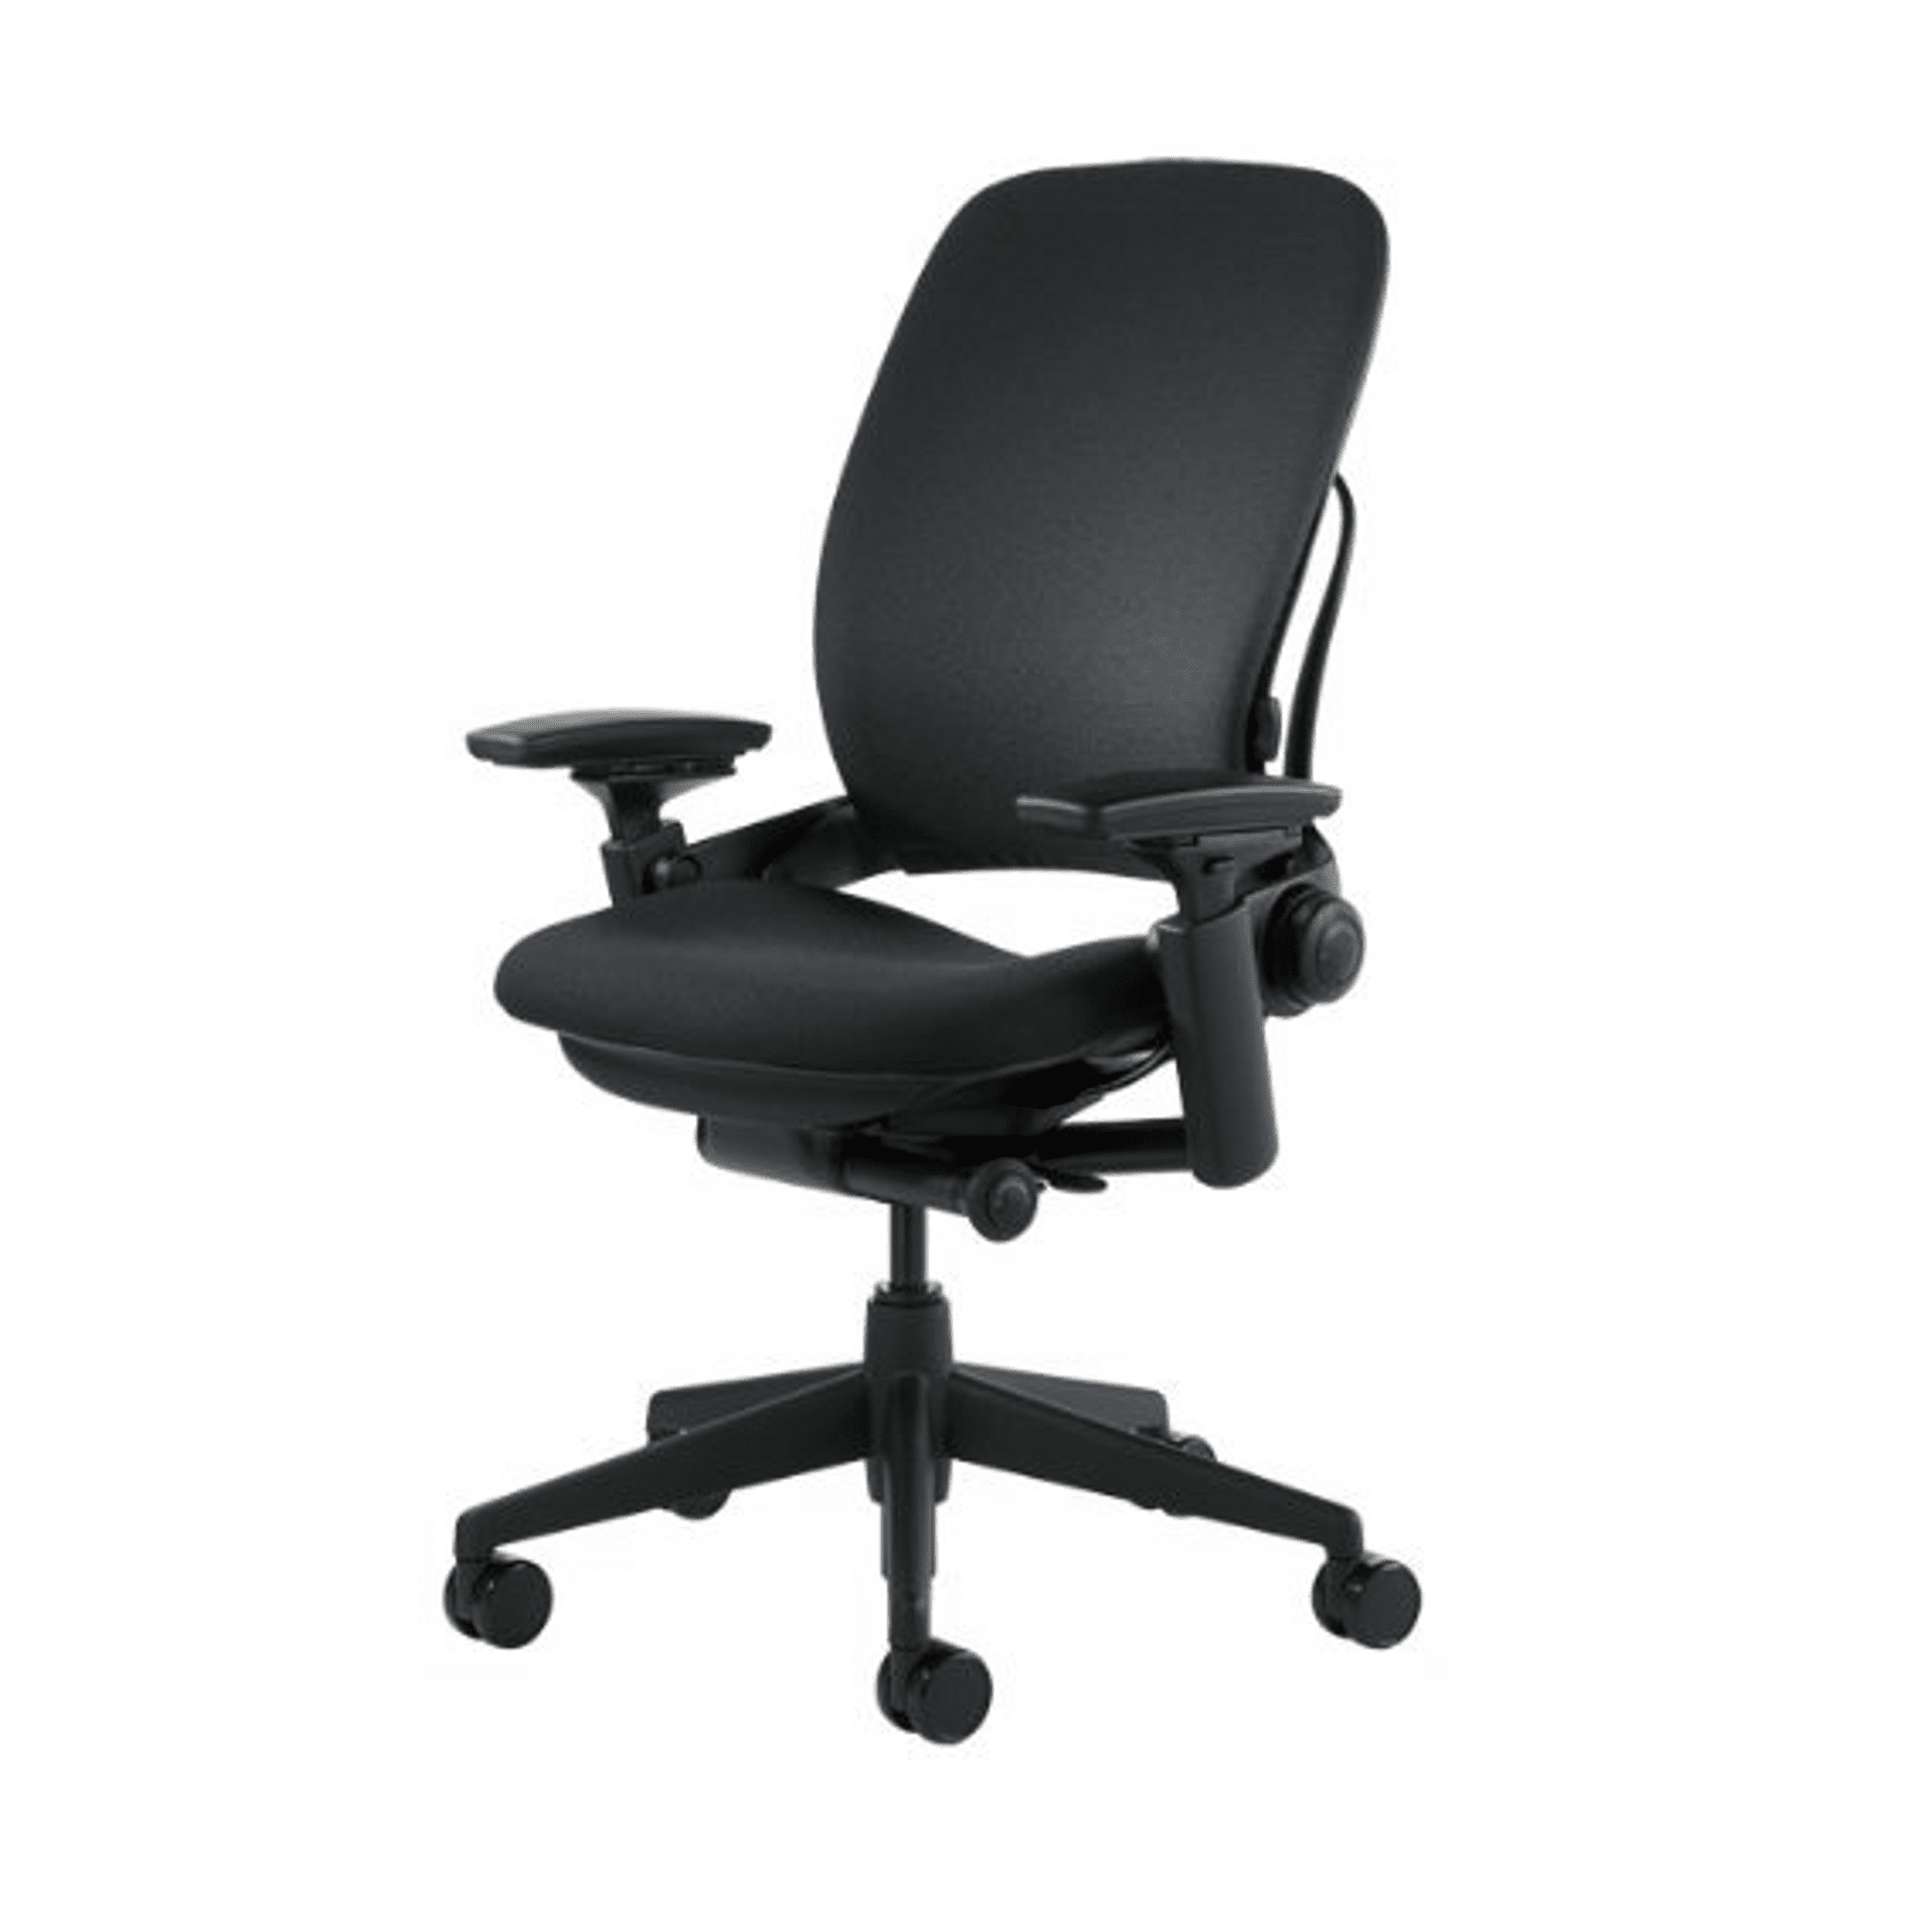 Steelcase Leap chair V2  | Black | Fabric Fully Adjustable Tilt Tension 4 Way Adjustable Arms - chairorama